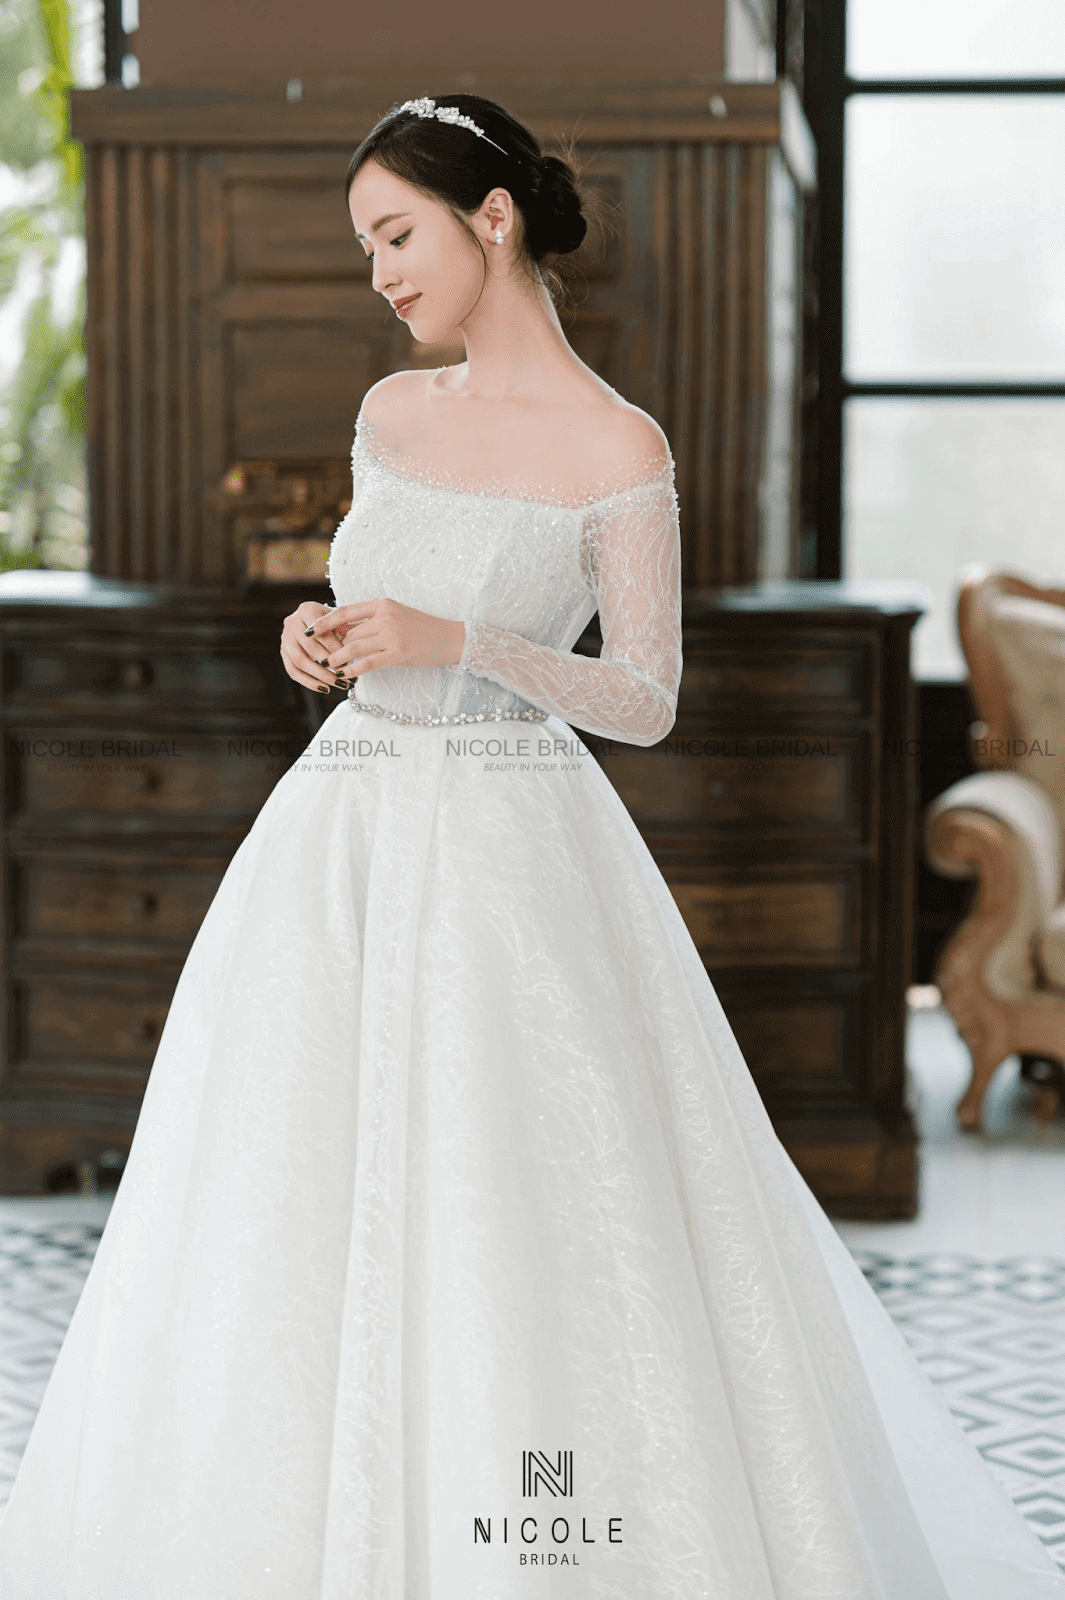 New White Lace Short Sleeve Wedding Dress With Simple Appliques And Halter  Hemline Korean Style Princess Bridal Gown From China From Zhu_guo_qin,  $46.21 | DHgate.Com